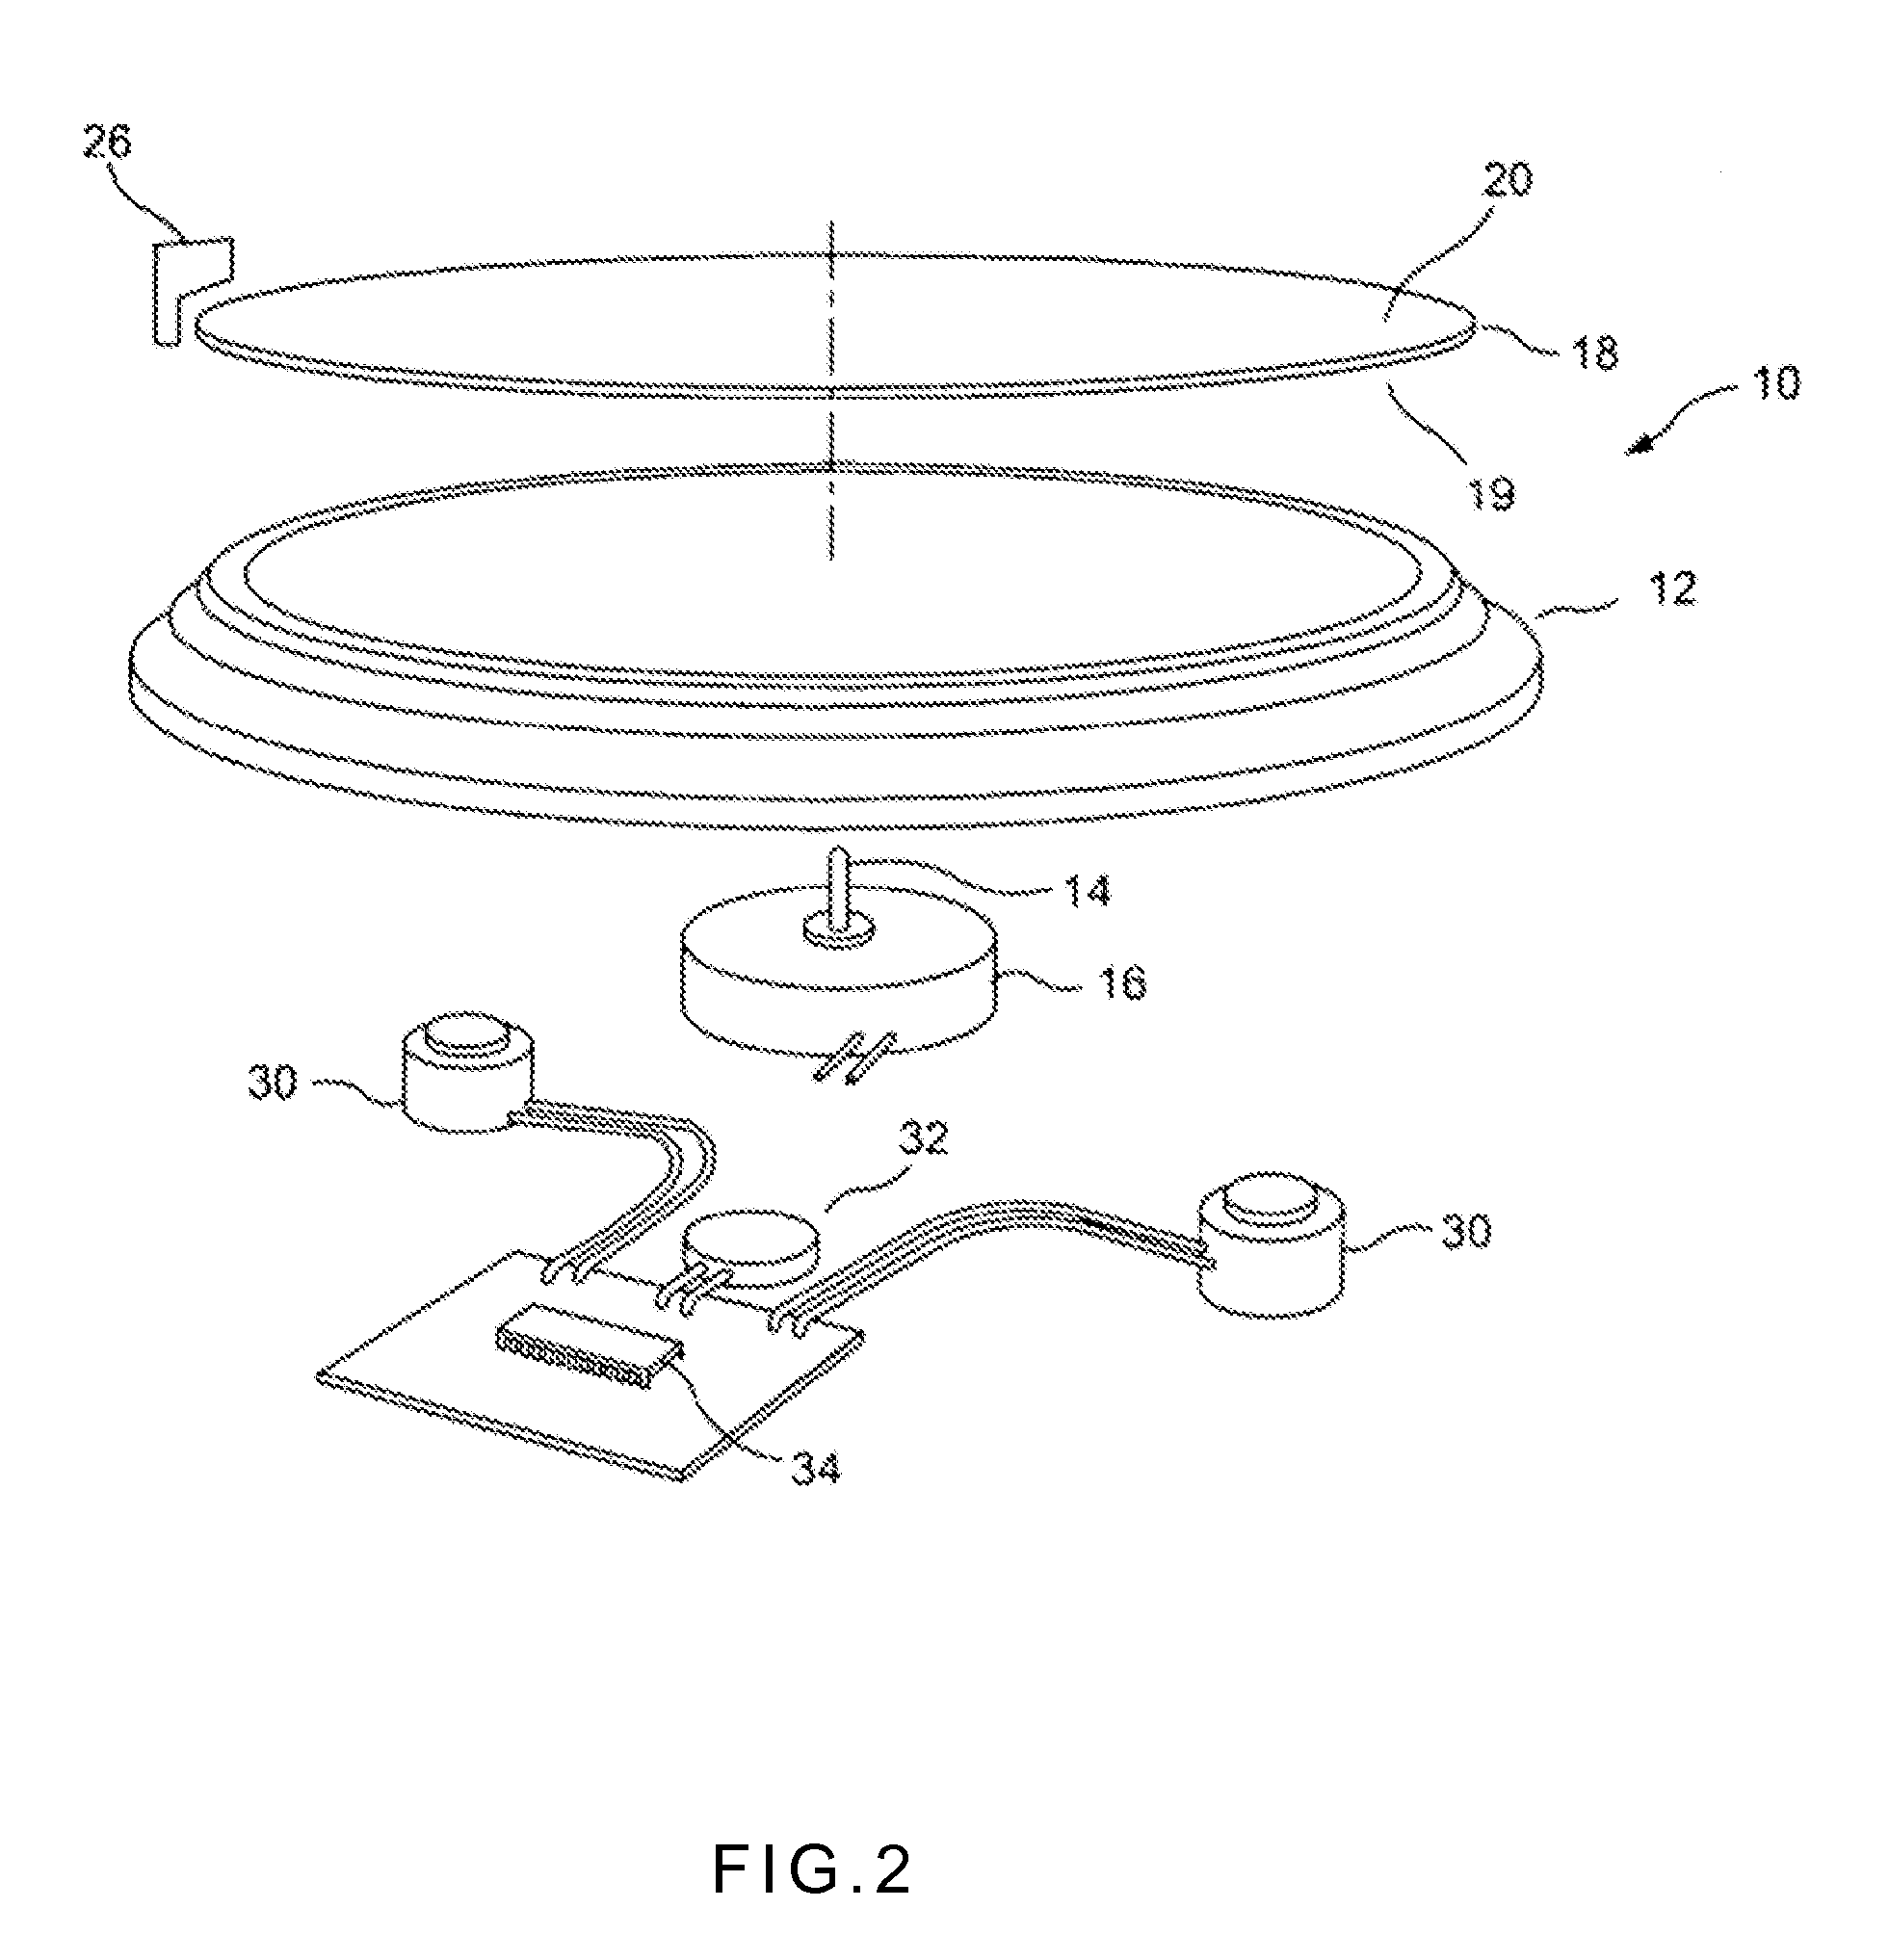 Variable Slippage Control For A Disc Jockey Control Surface